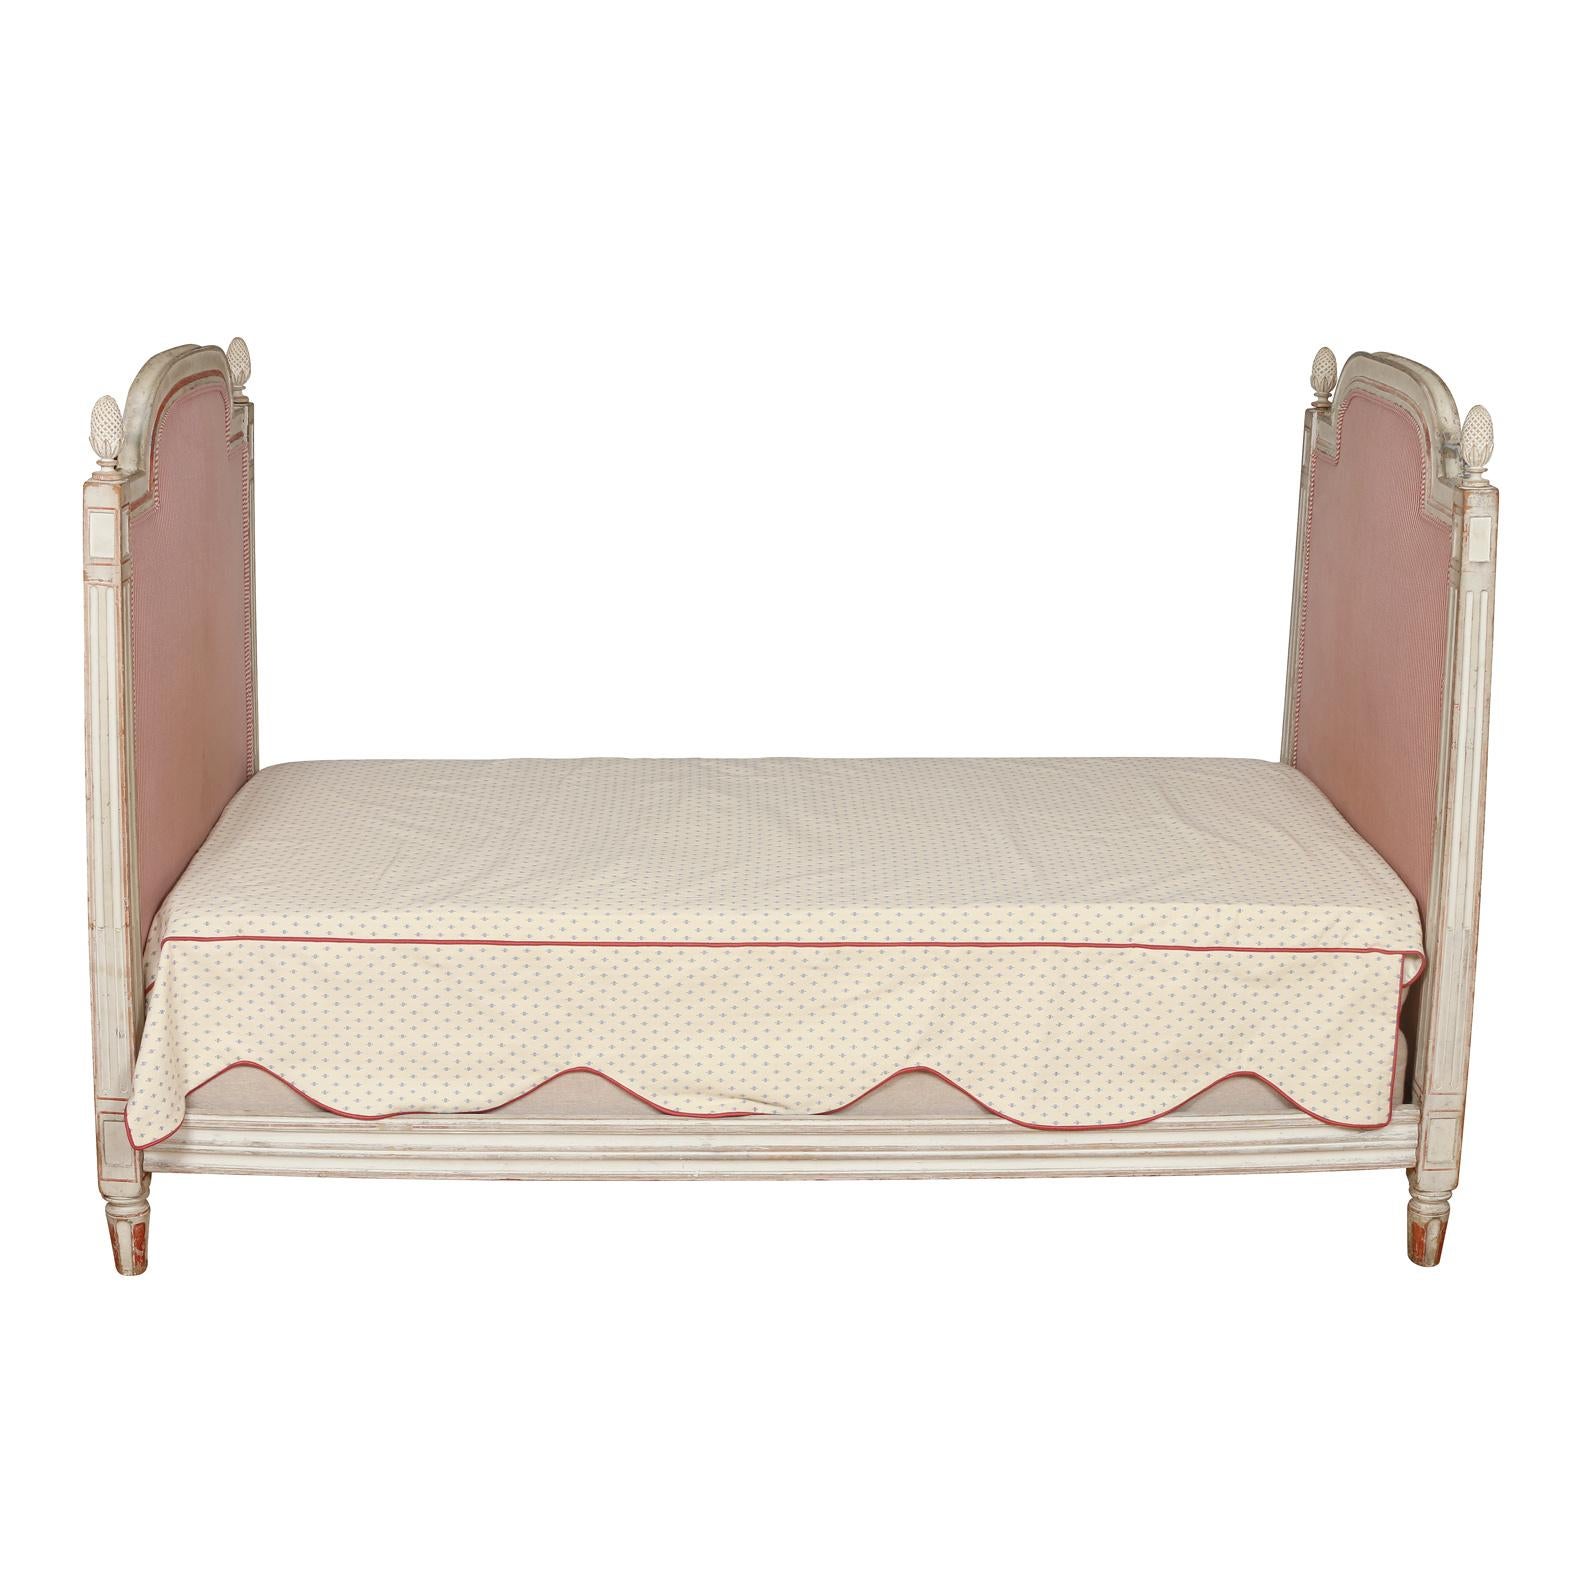 A charming painted daybed in the Louis XVI style, this gem could be the centerpiece of a room. Made up of two ends upholstered in a pink/red ticking stripe, this piece features a grayish white finish with red trim and features lovely carved details,